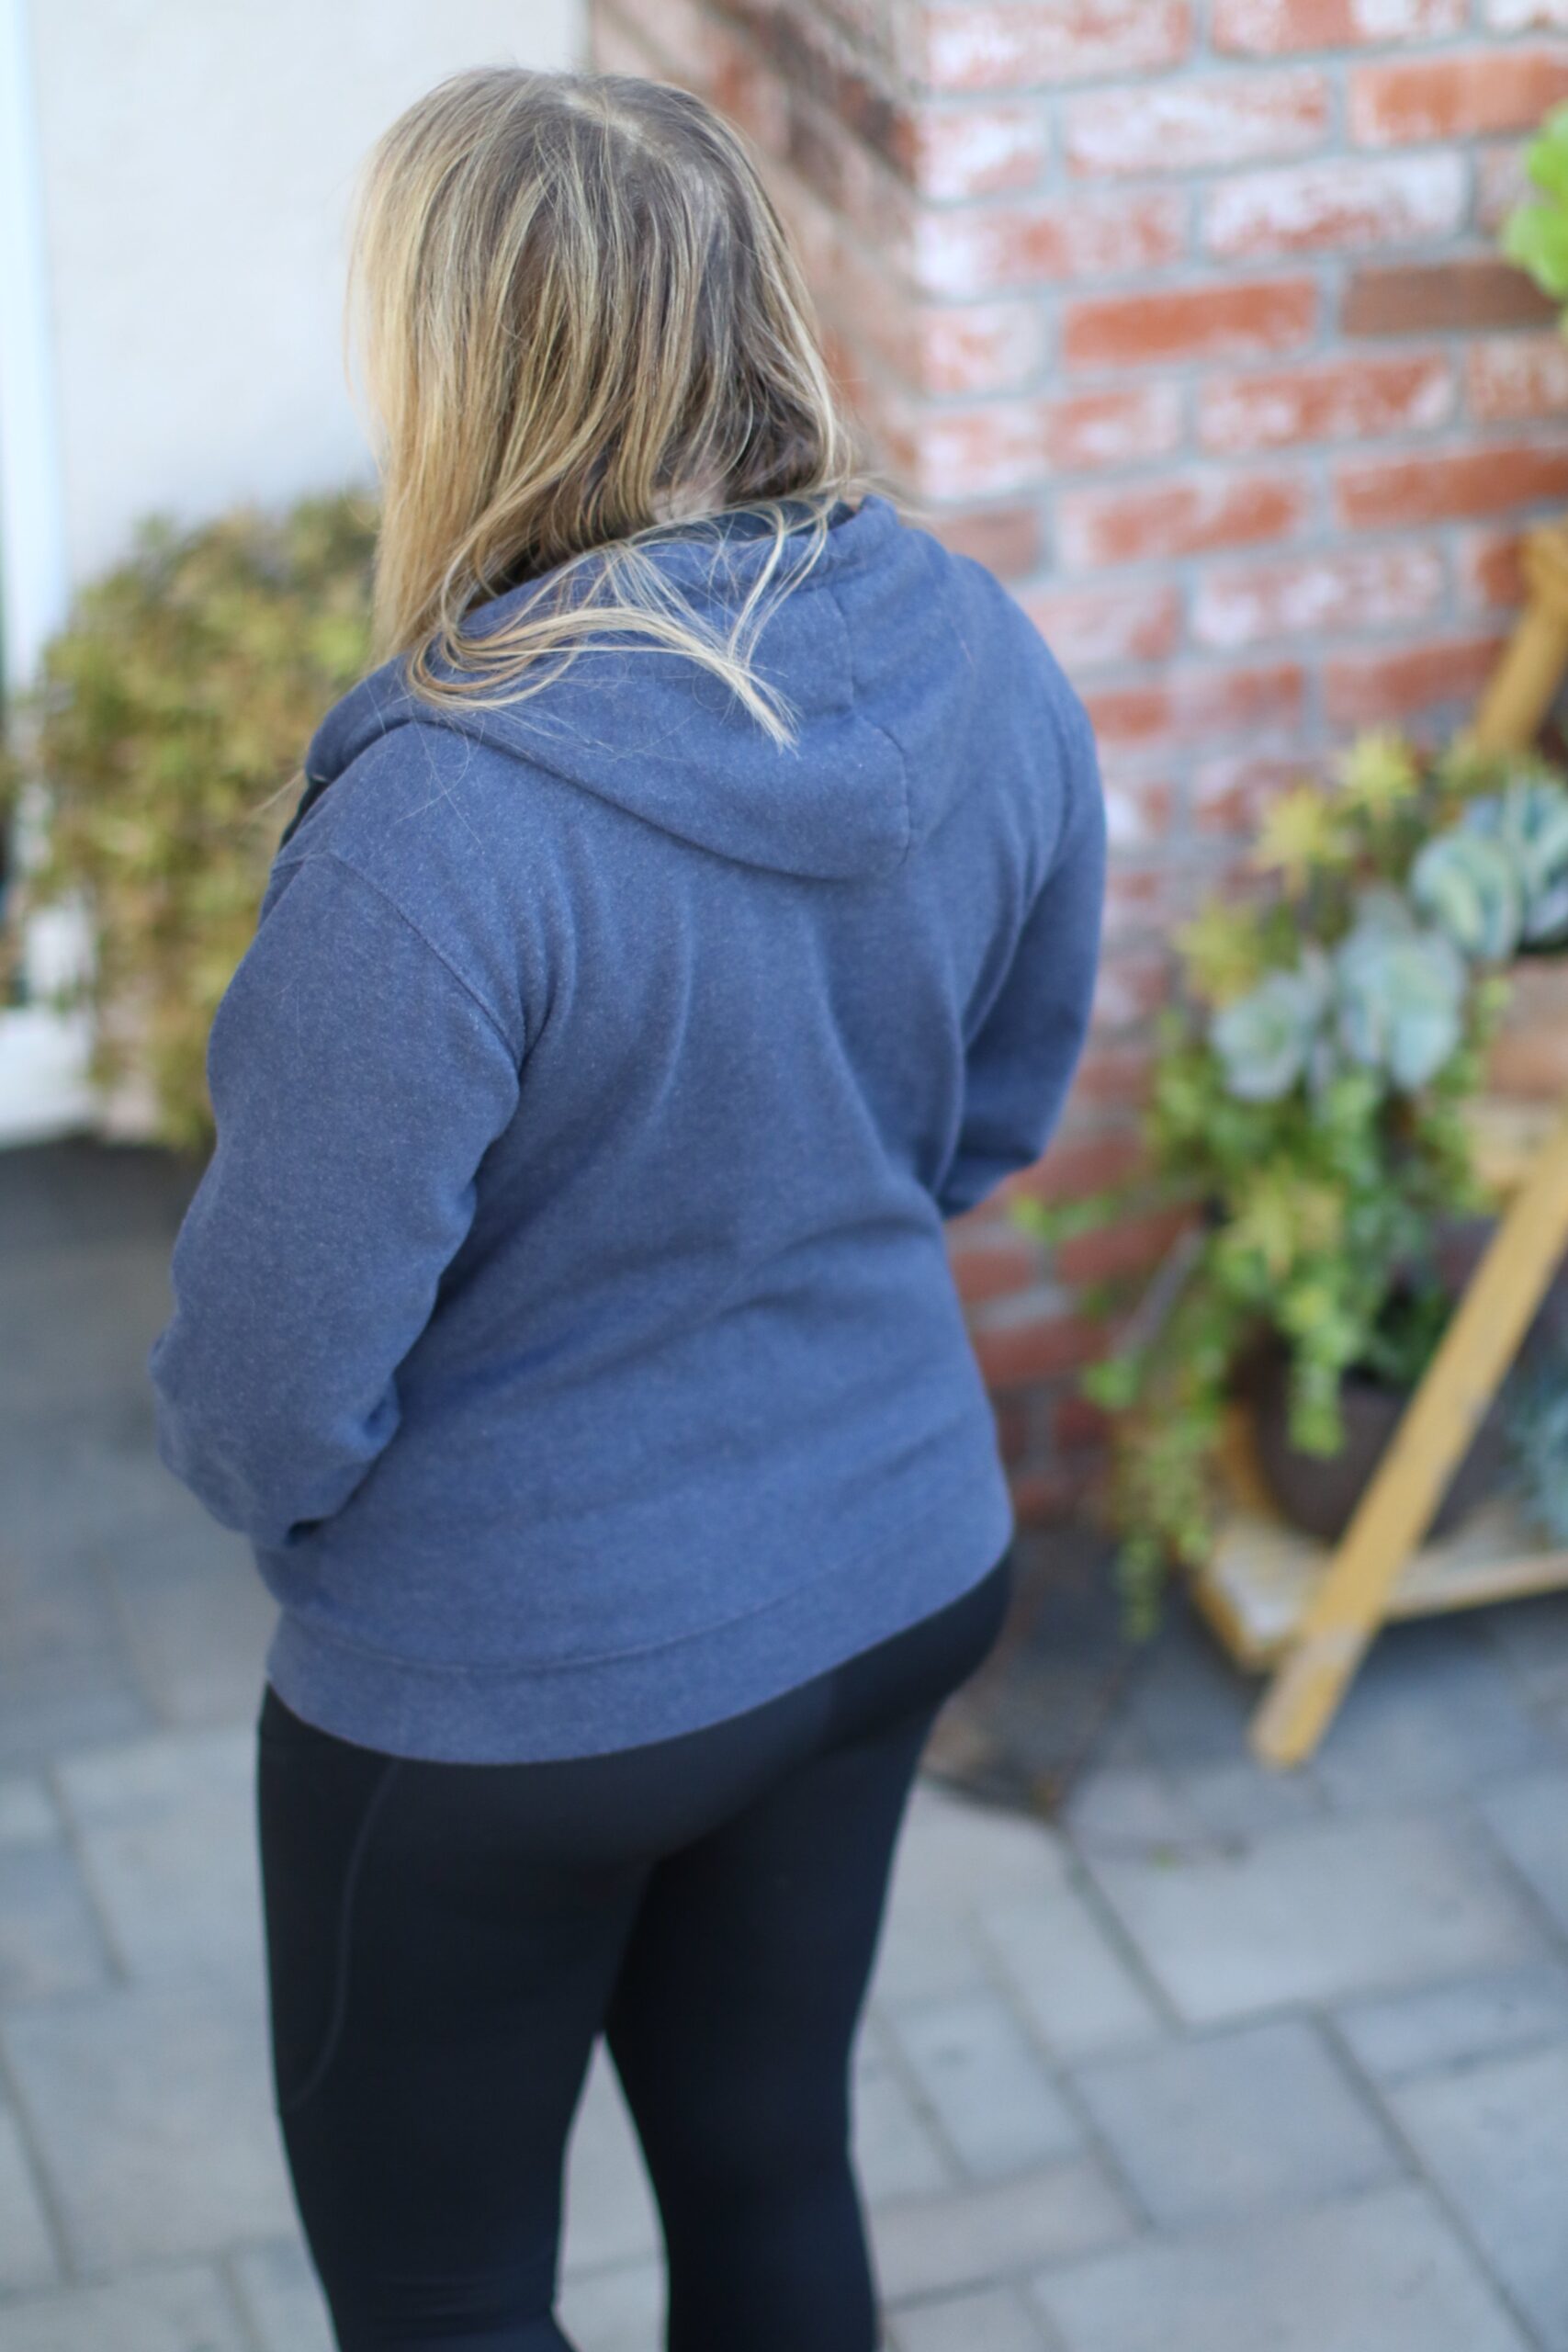 Woman wearing a blue hoodie with black spandex leggings outside on a patio